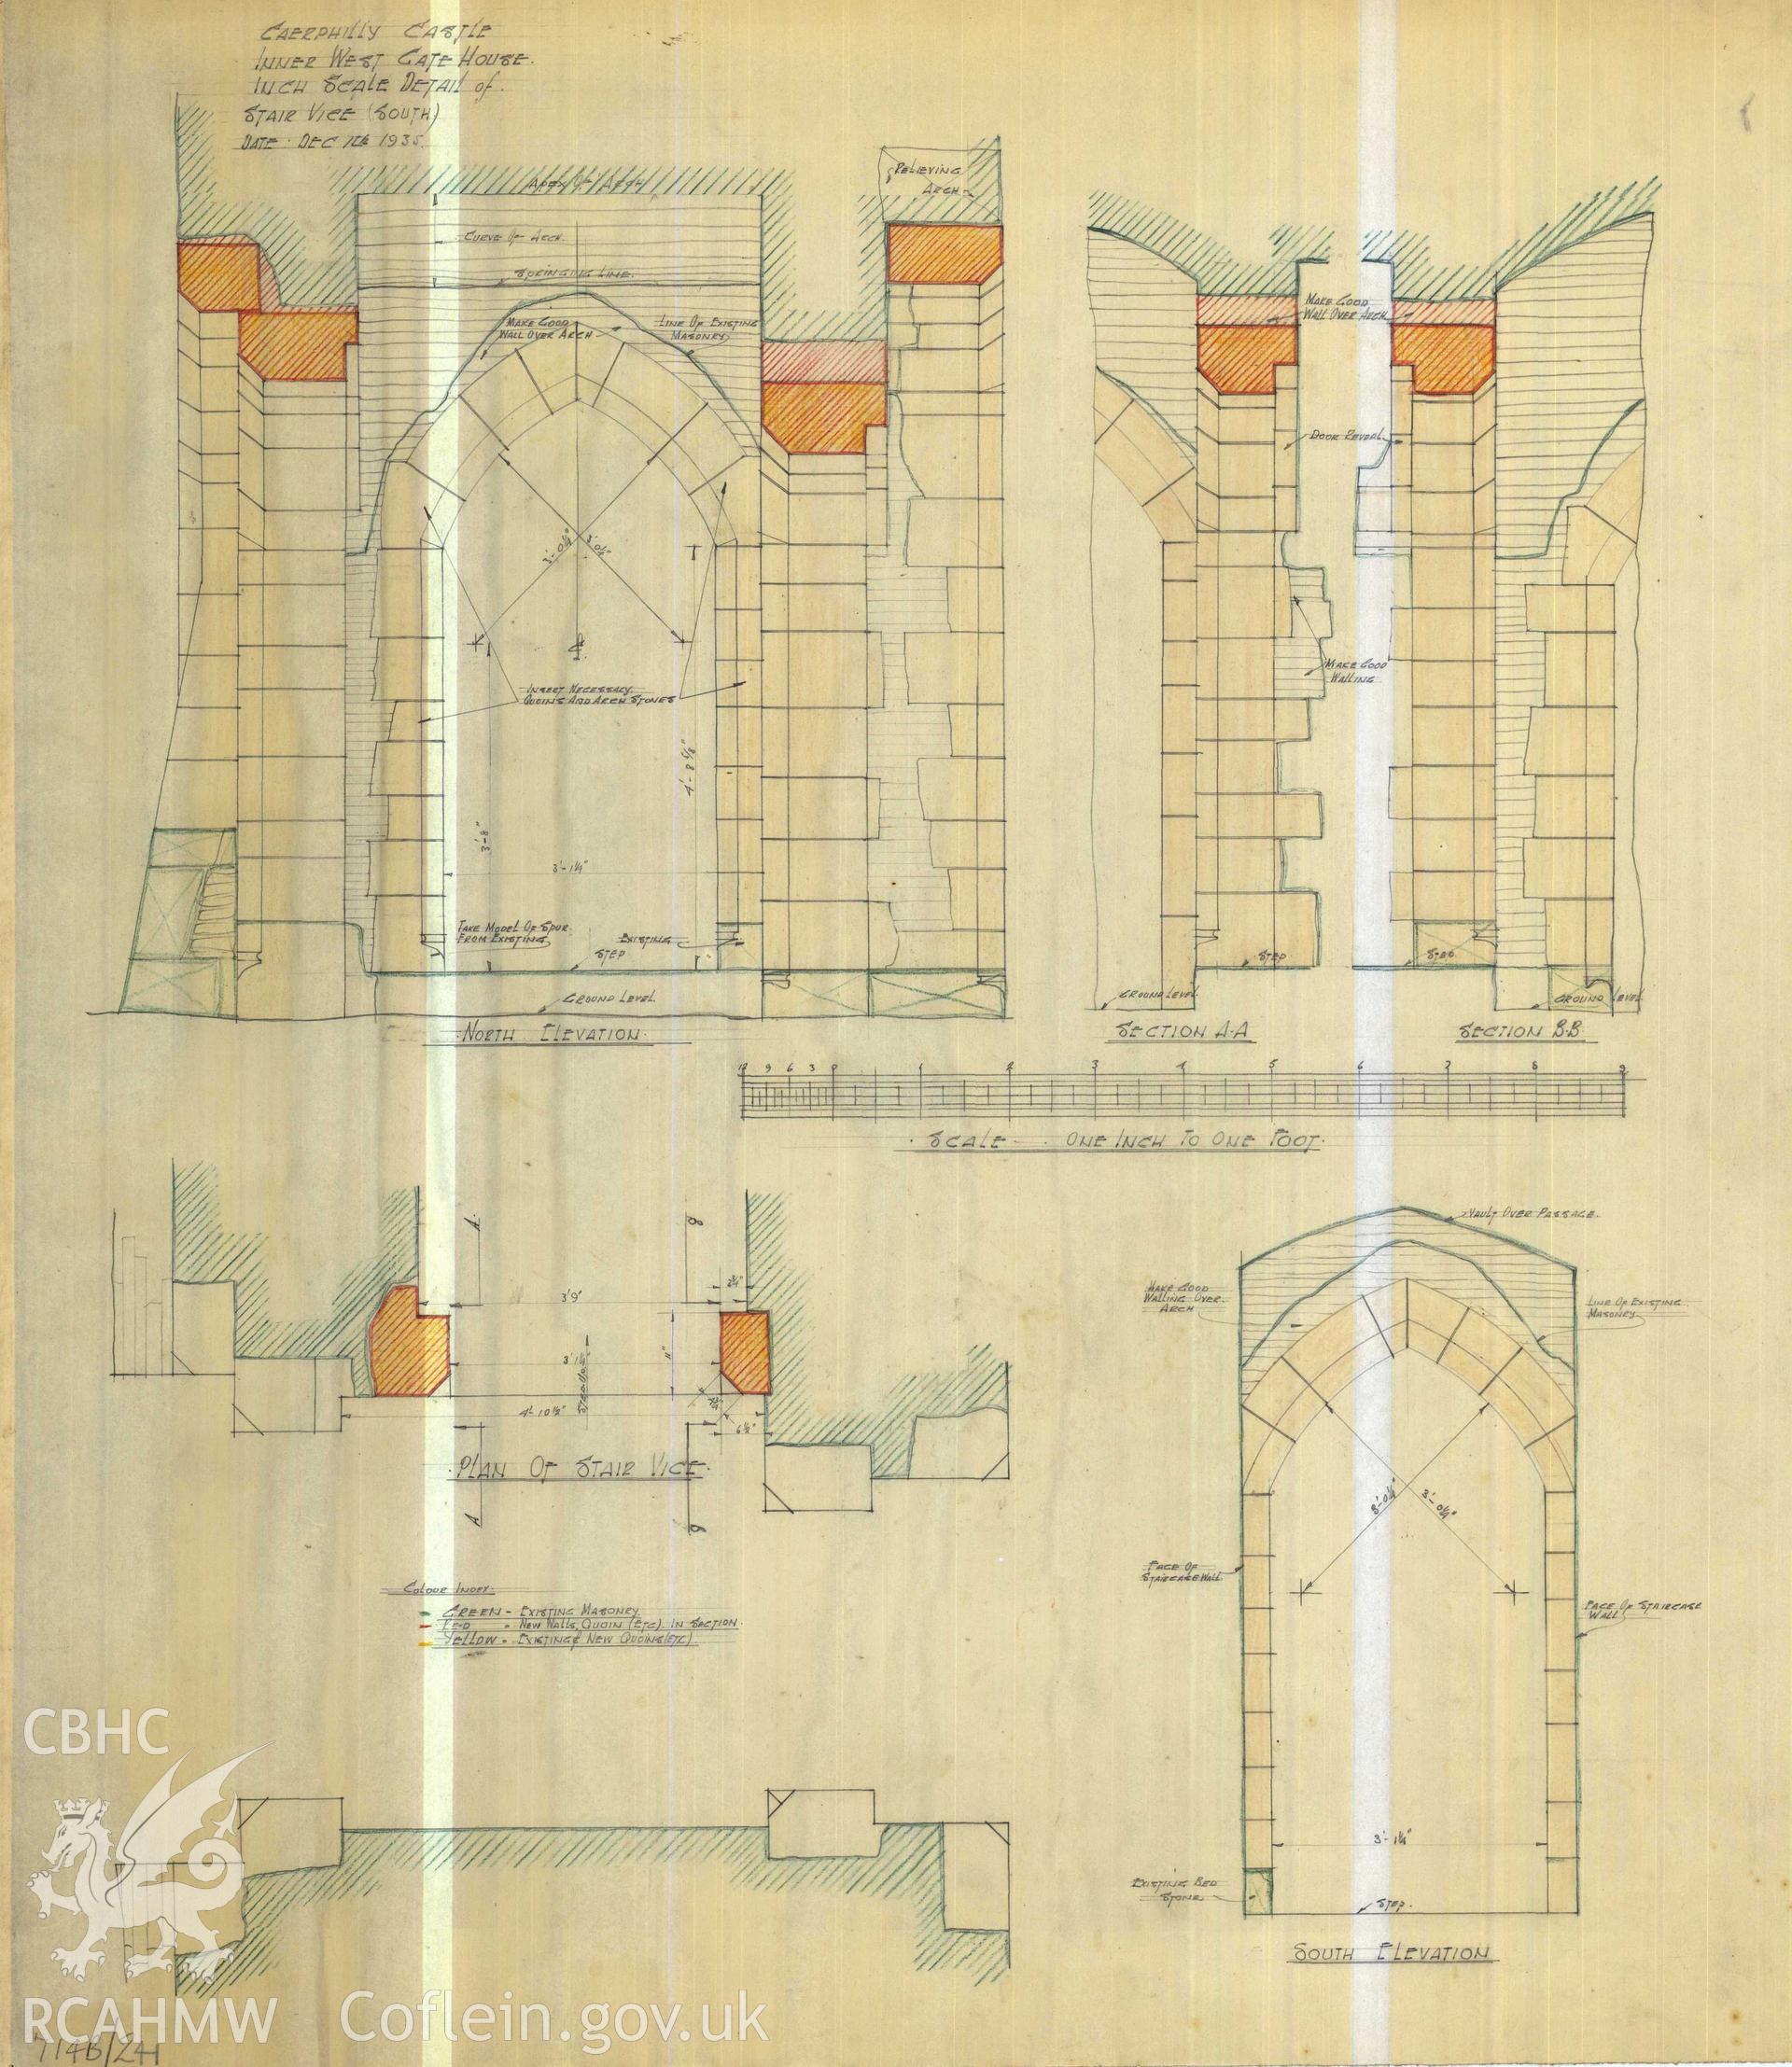 Cadw guardianship monument drawing of Caerphilly Castle. Inner W gate, stairs doorway. Cadw Ref. No:714B/241. Scale 1:12.